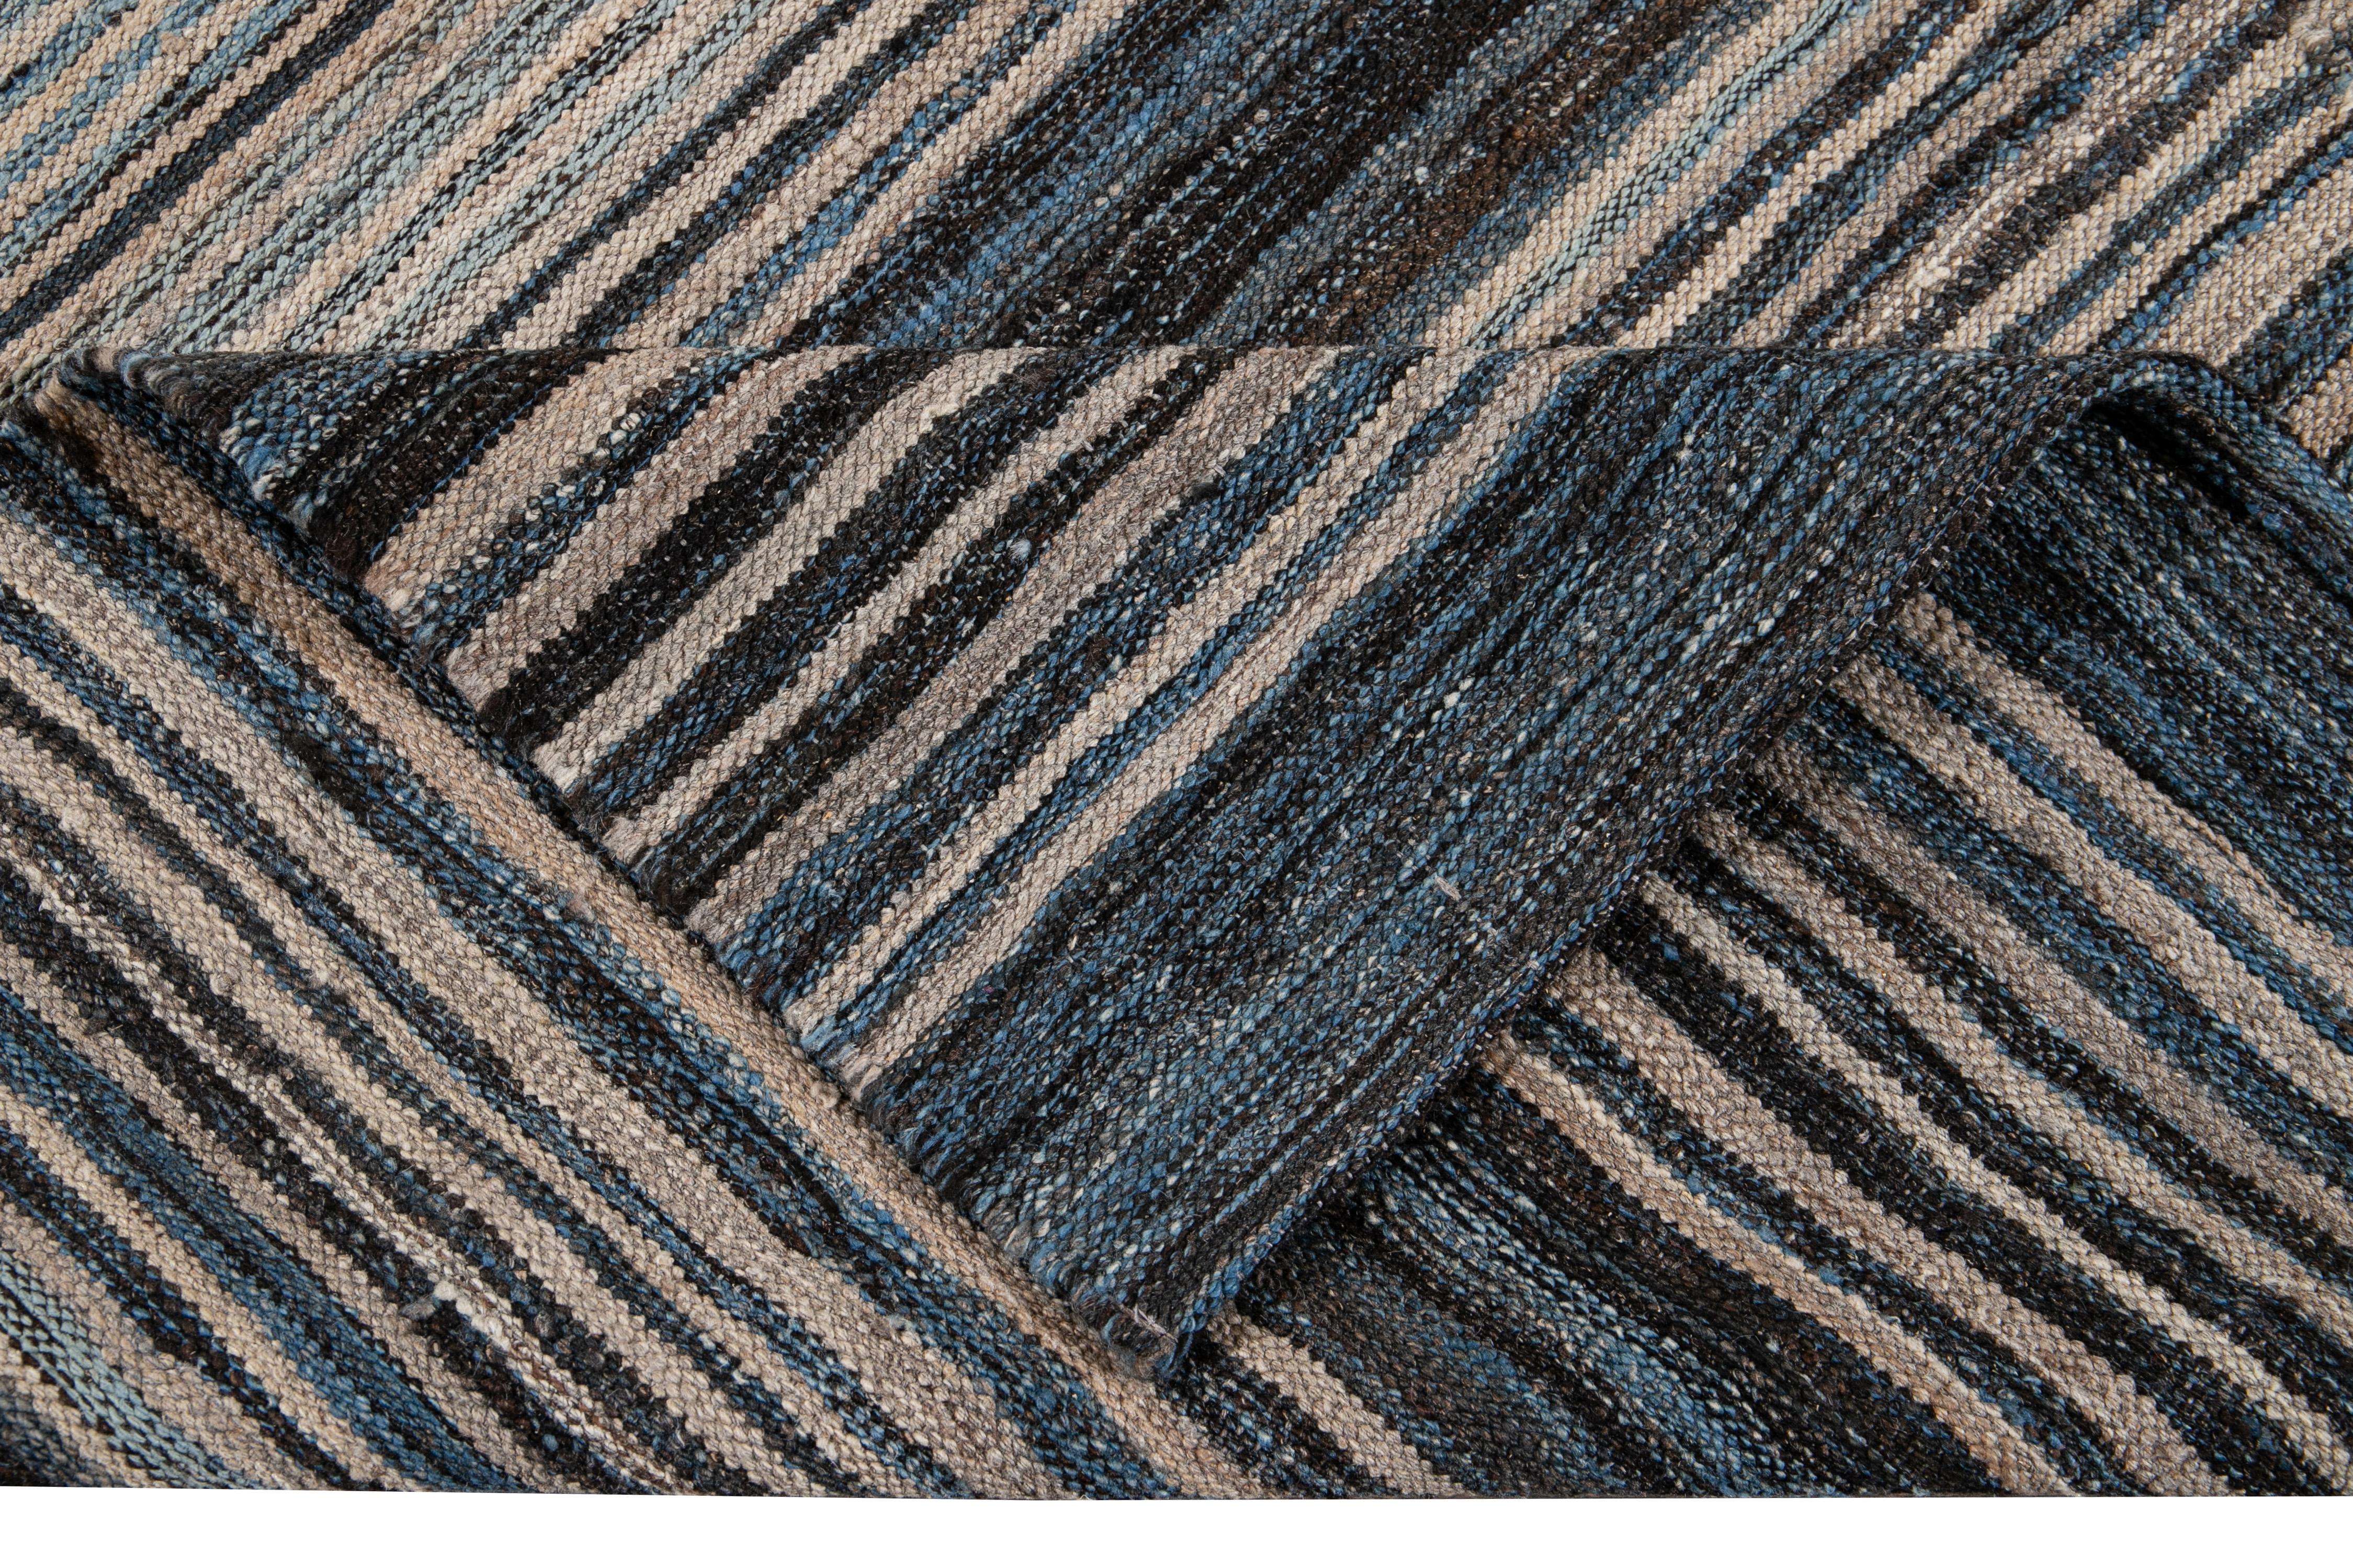 Beautiful Modern flat-weave handmade wool rug. This Kilim rug has a beige field with accents of blue and brown in a gorgeous geometric striped design.

This rug measures: 9'4